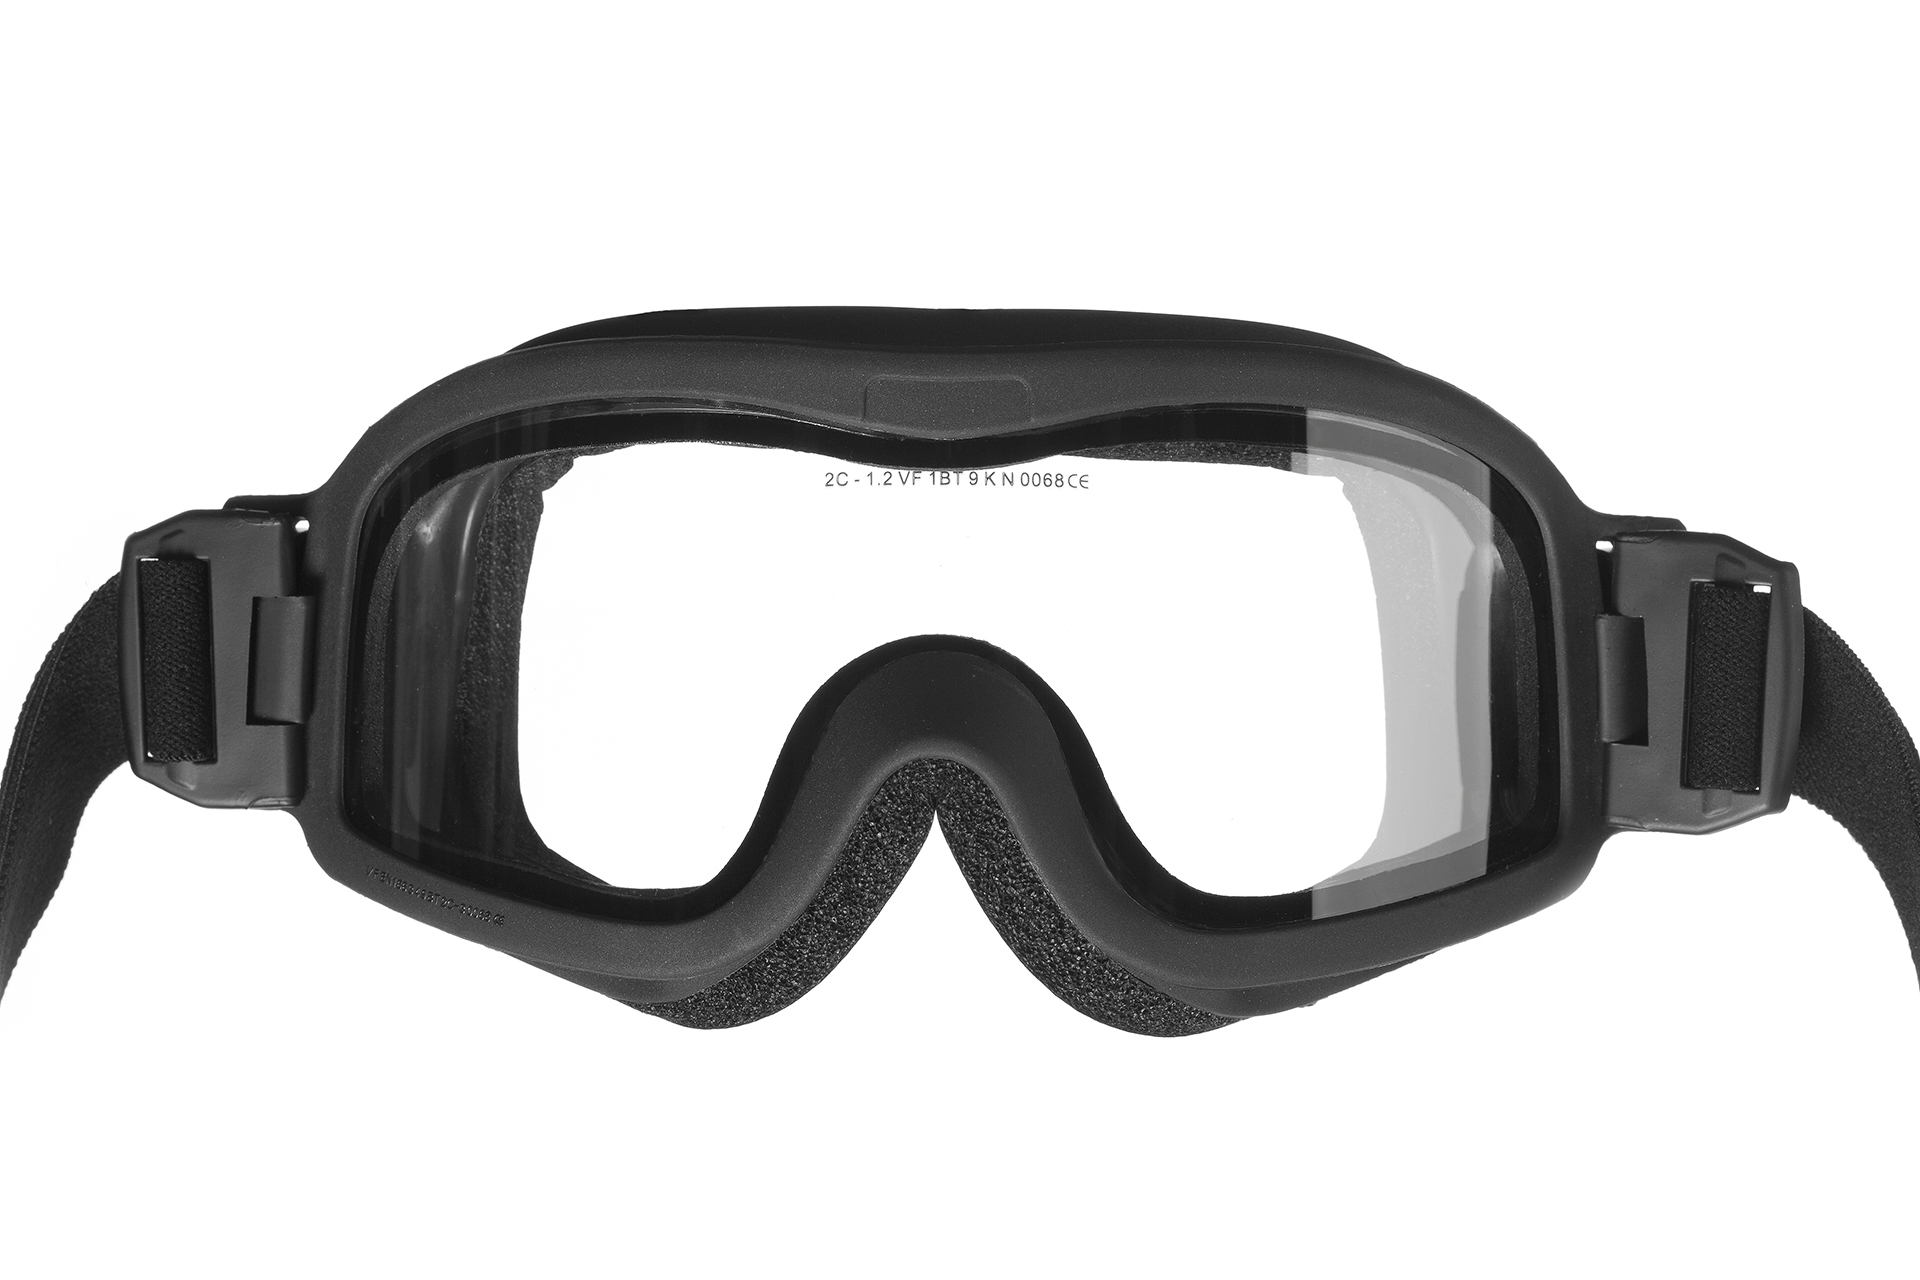 Sealed vft1 Firefighter goggles 4